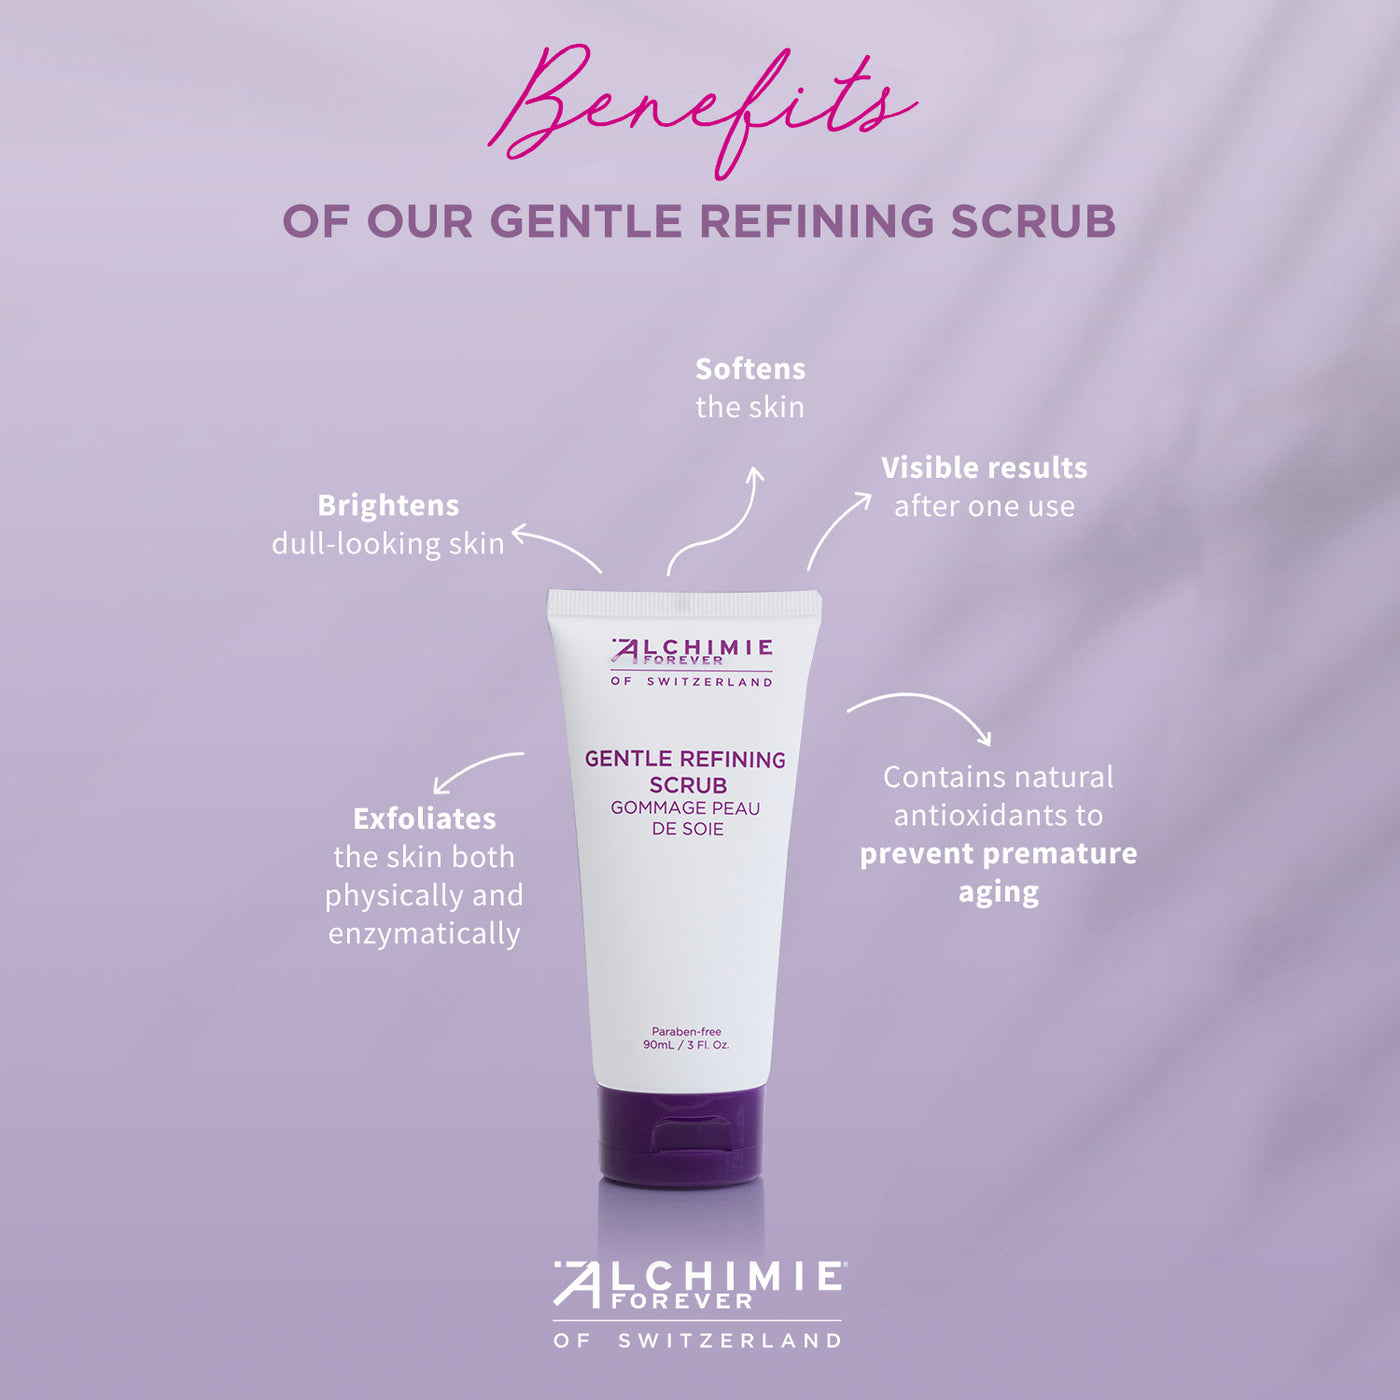 Gentle Refining Scrub Benefits.  Dual exfoliation brightens and softens the skin while preventing signs of premature aging.  Visible results after one use.  